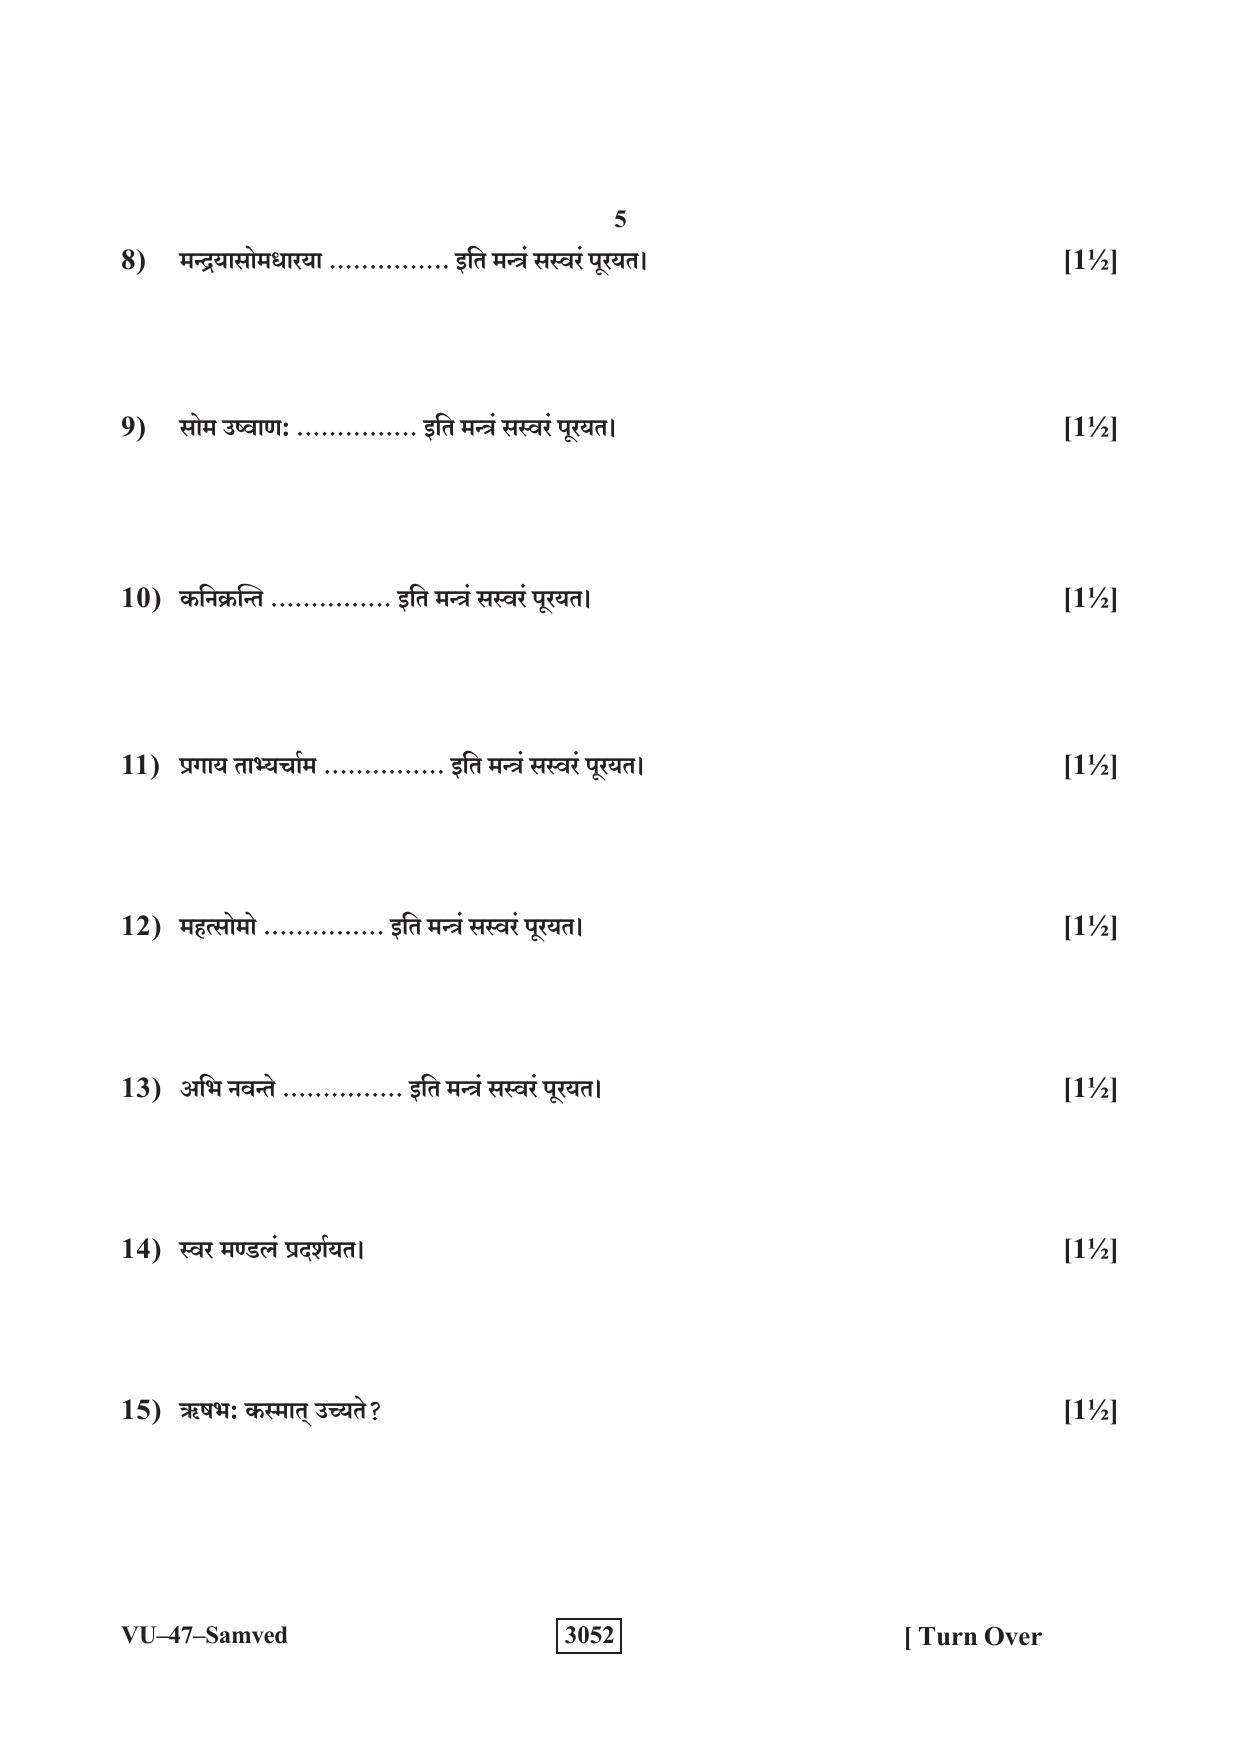 RBSE 2023 Samved Varishtha Upadhyay Question Paper - Page 5